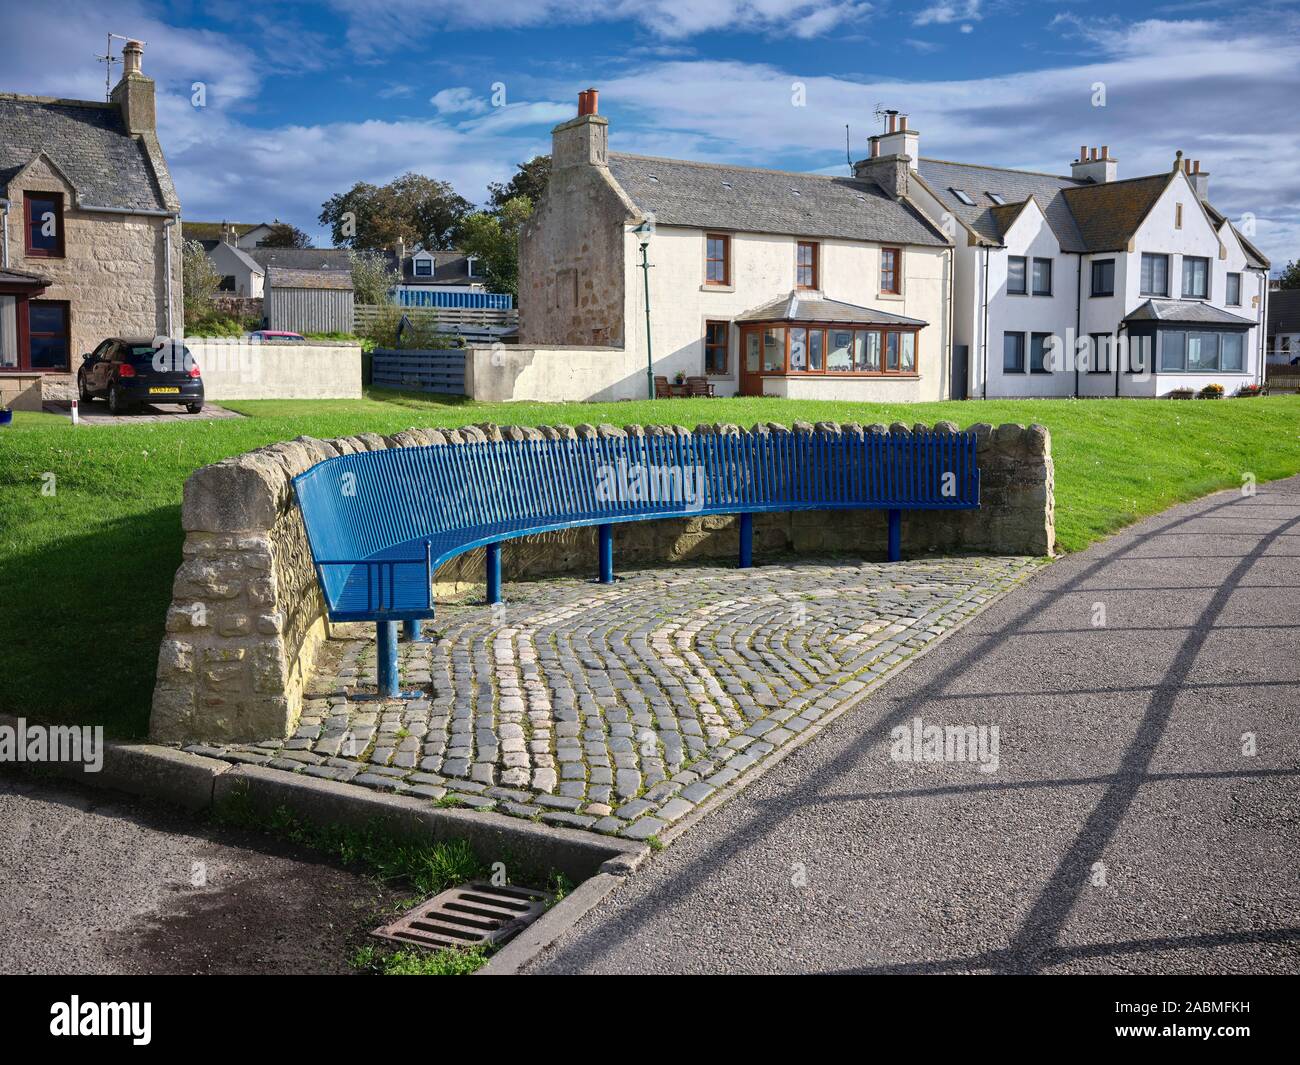 A decorative, blue painted iron sea front seat backed by stone wall and traditional cottages Portmahomack. 26/09/19 Stock Photo